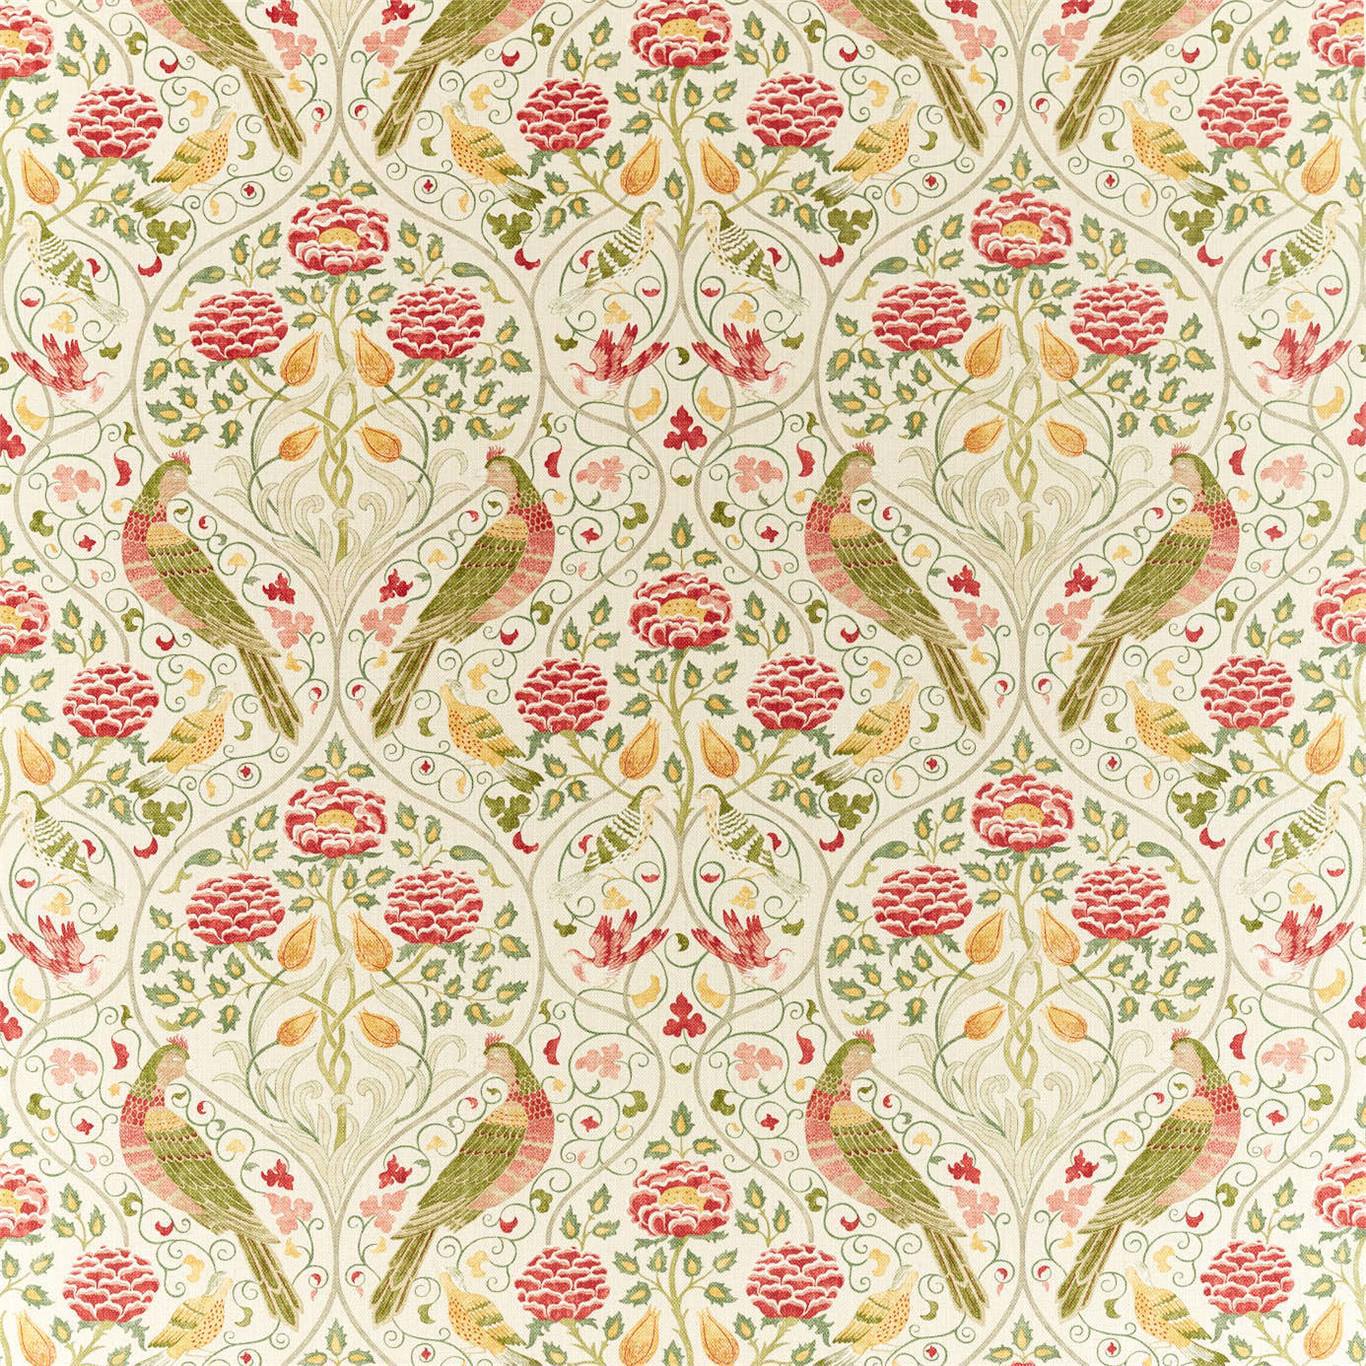 Seasons By May Fabric by Morris & Co.